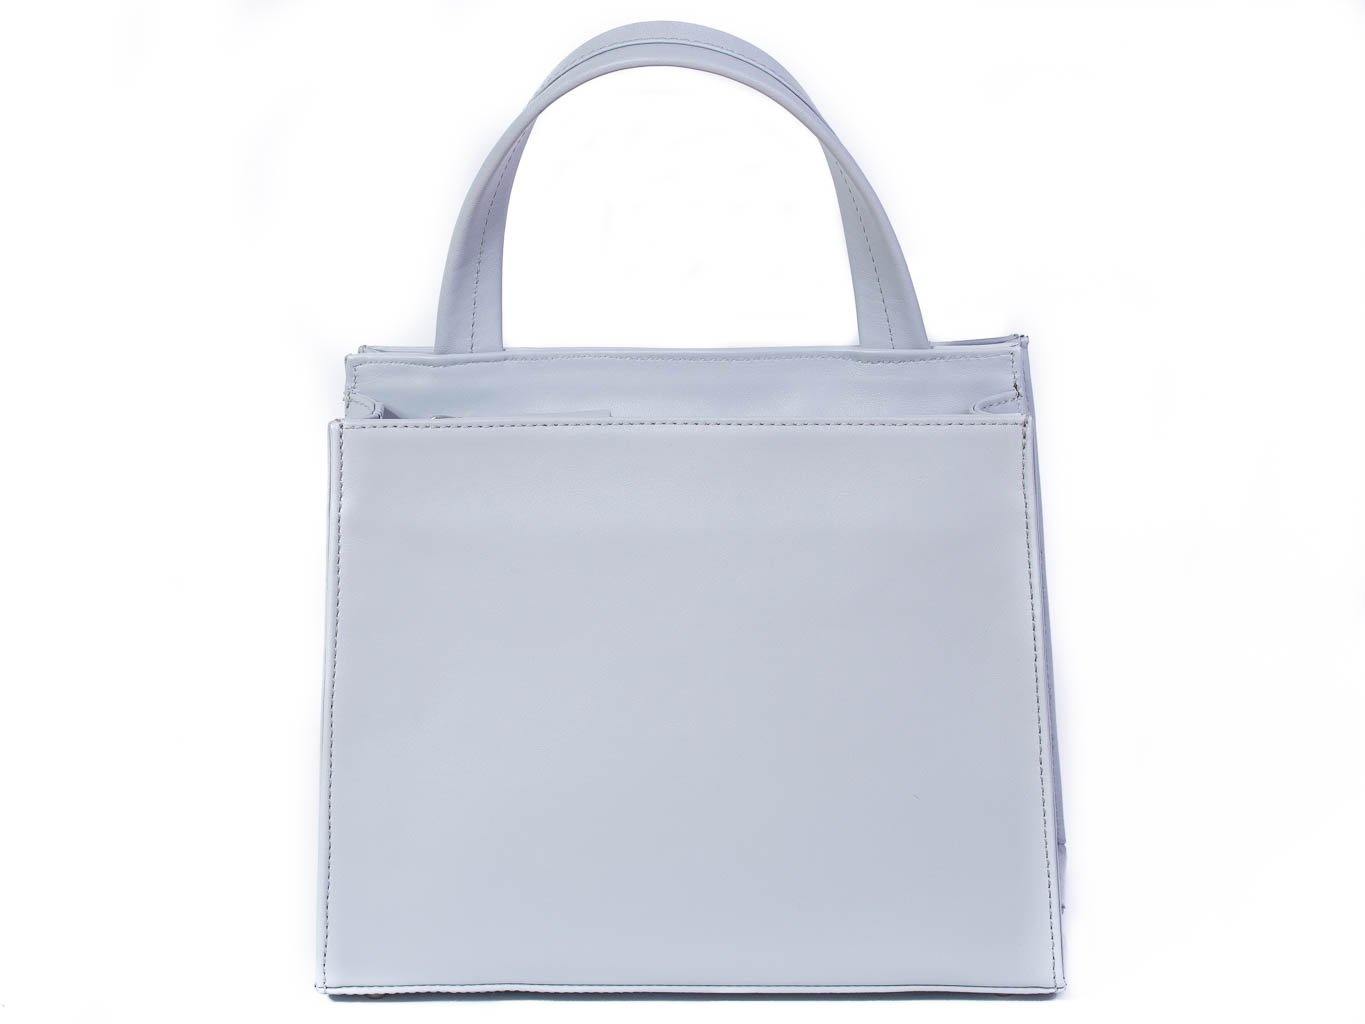 Top Handle Springbok Handbag in Baby Blue with a stripe feature by Sherene Melinda back